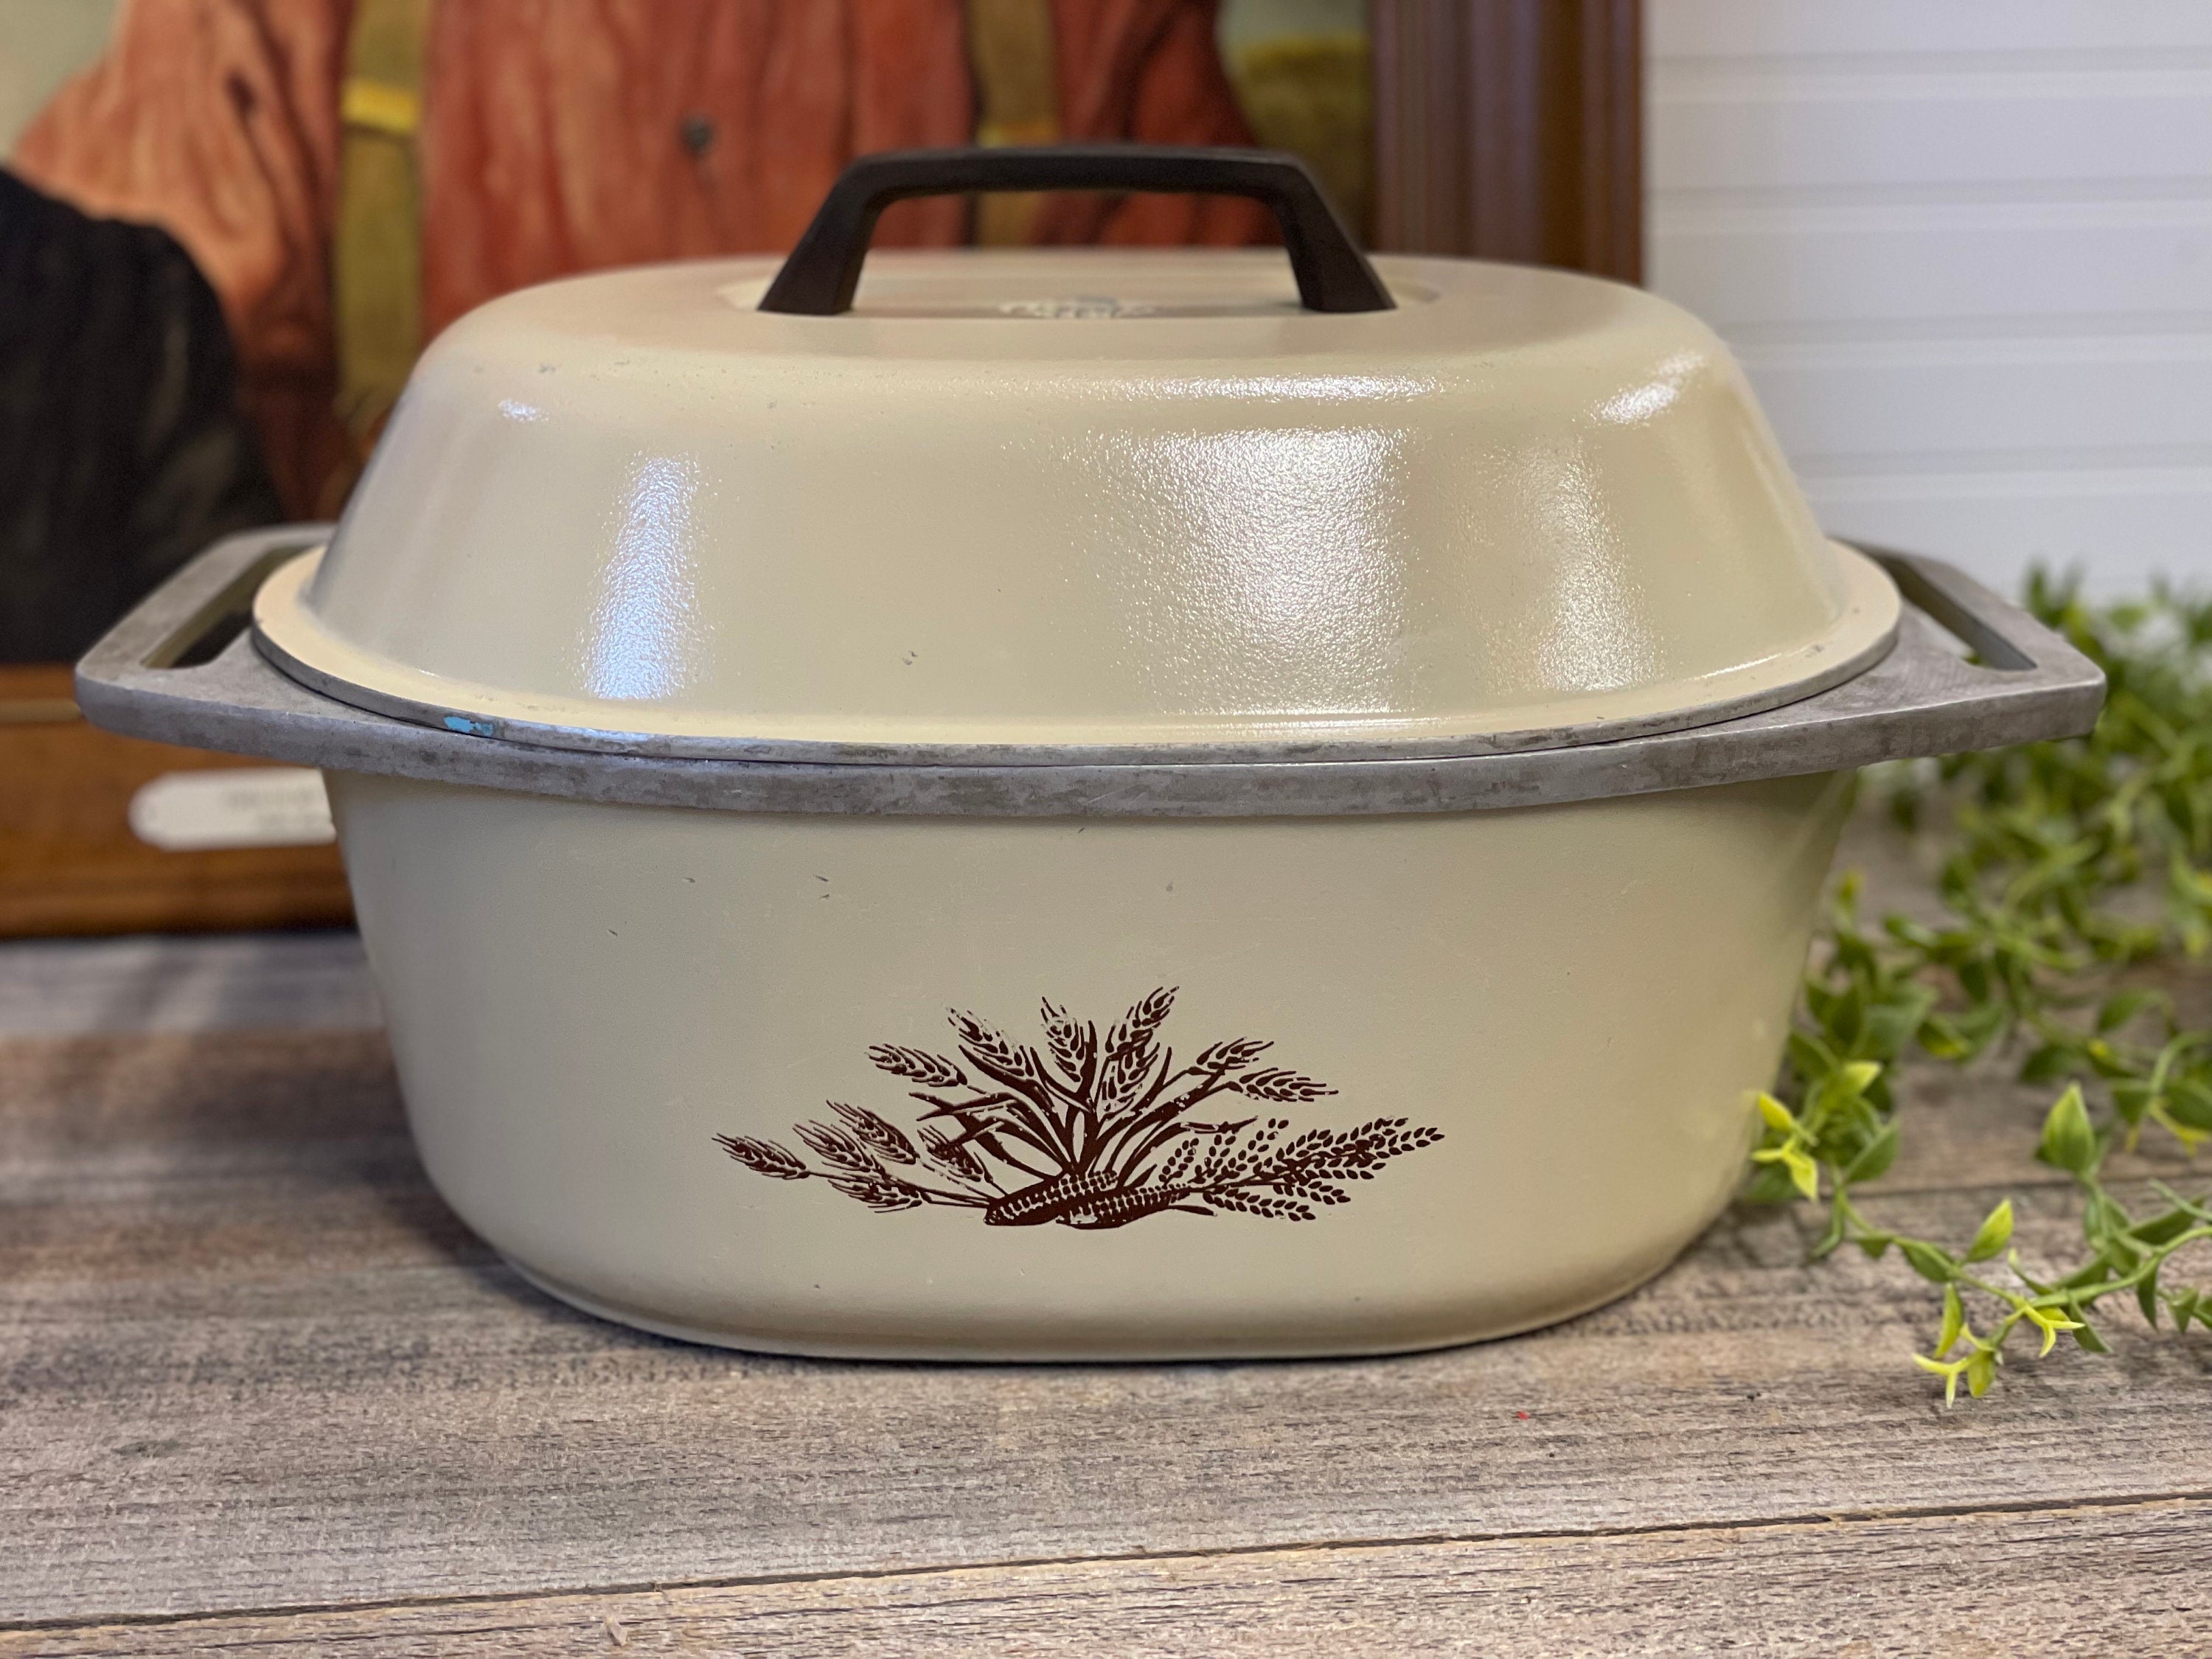 Magnaware Cast Aluminum Dutch Oven - Oval Dutch Oven Pot with Lid for Families and Parties - Lightweight Cajun Cookware with Ideal Heat Distribution